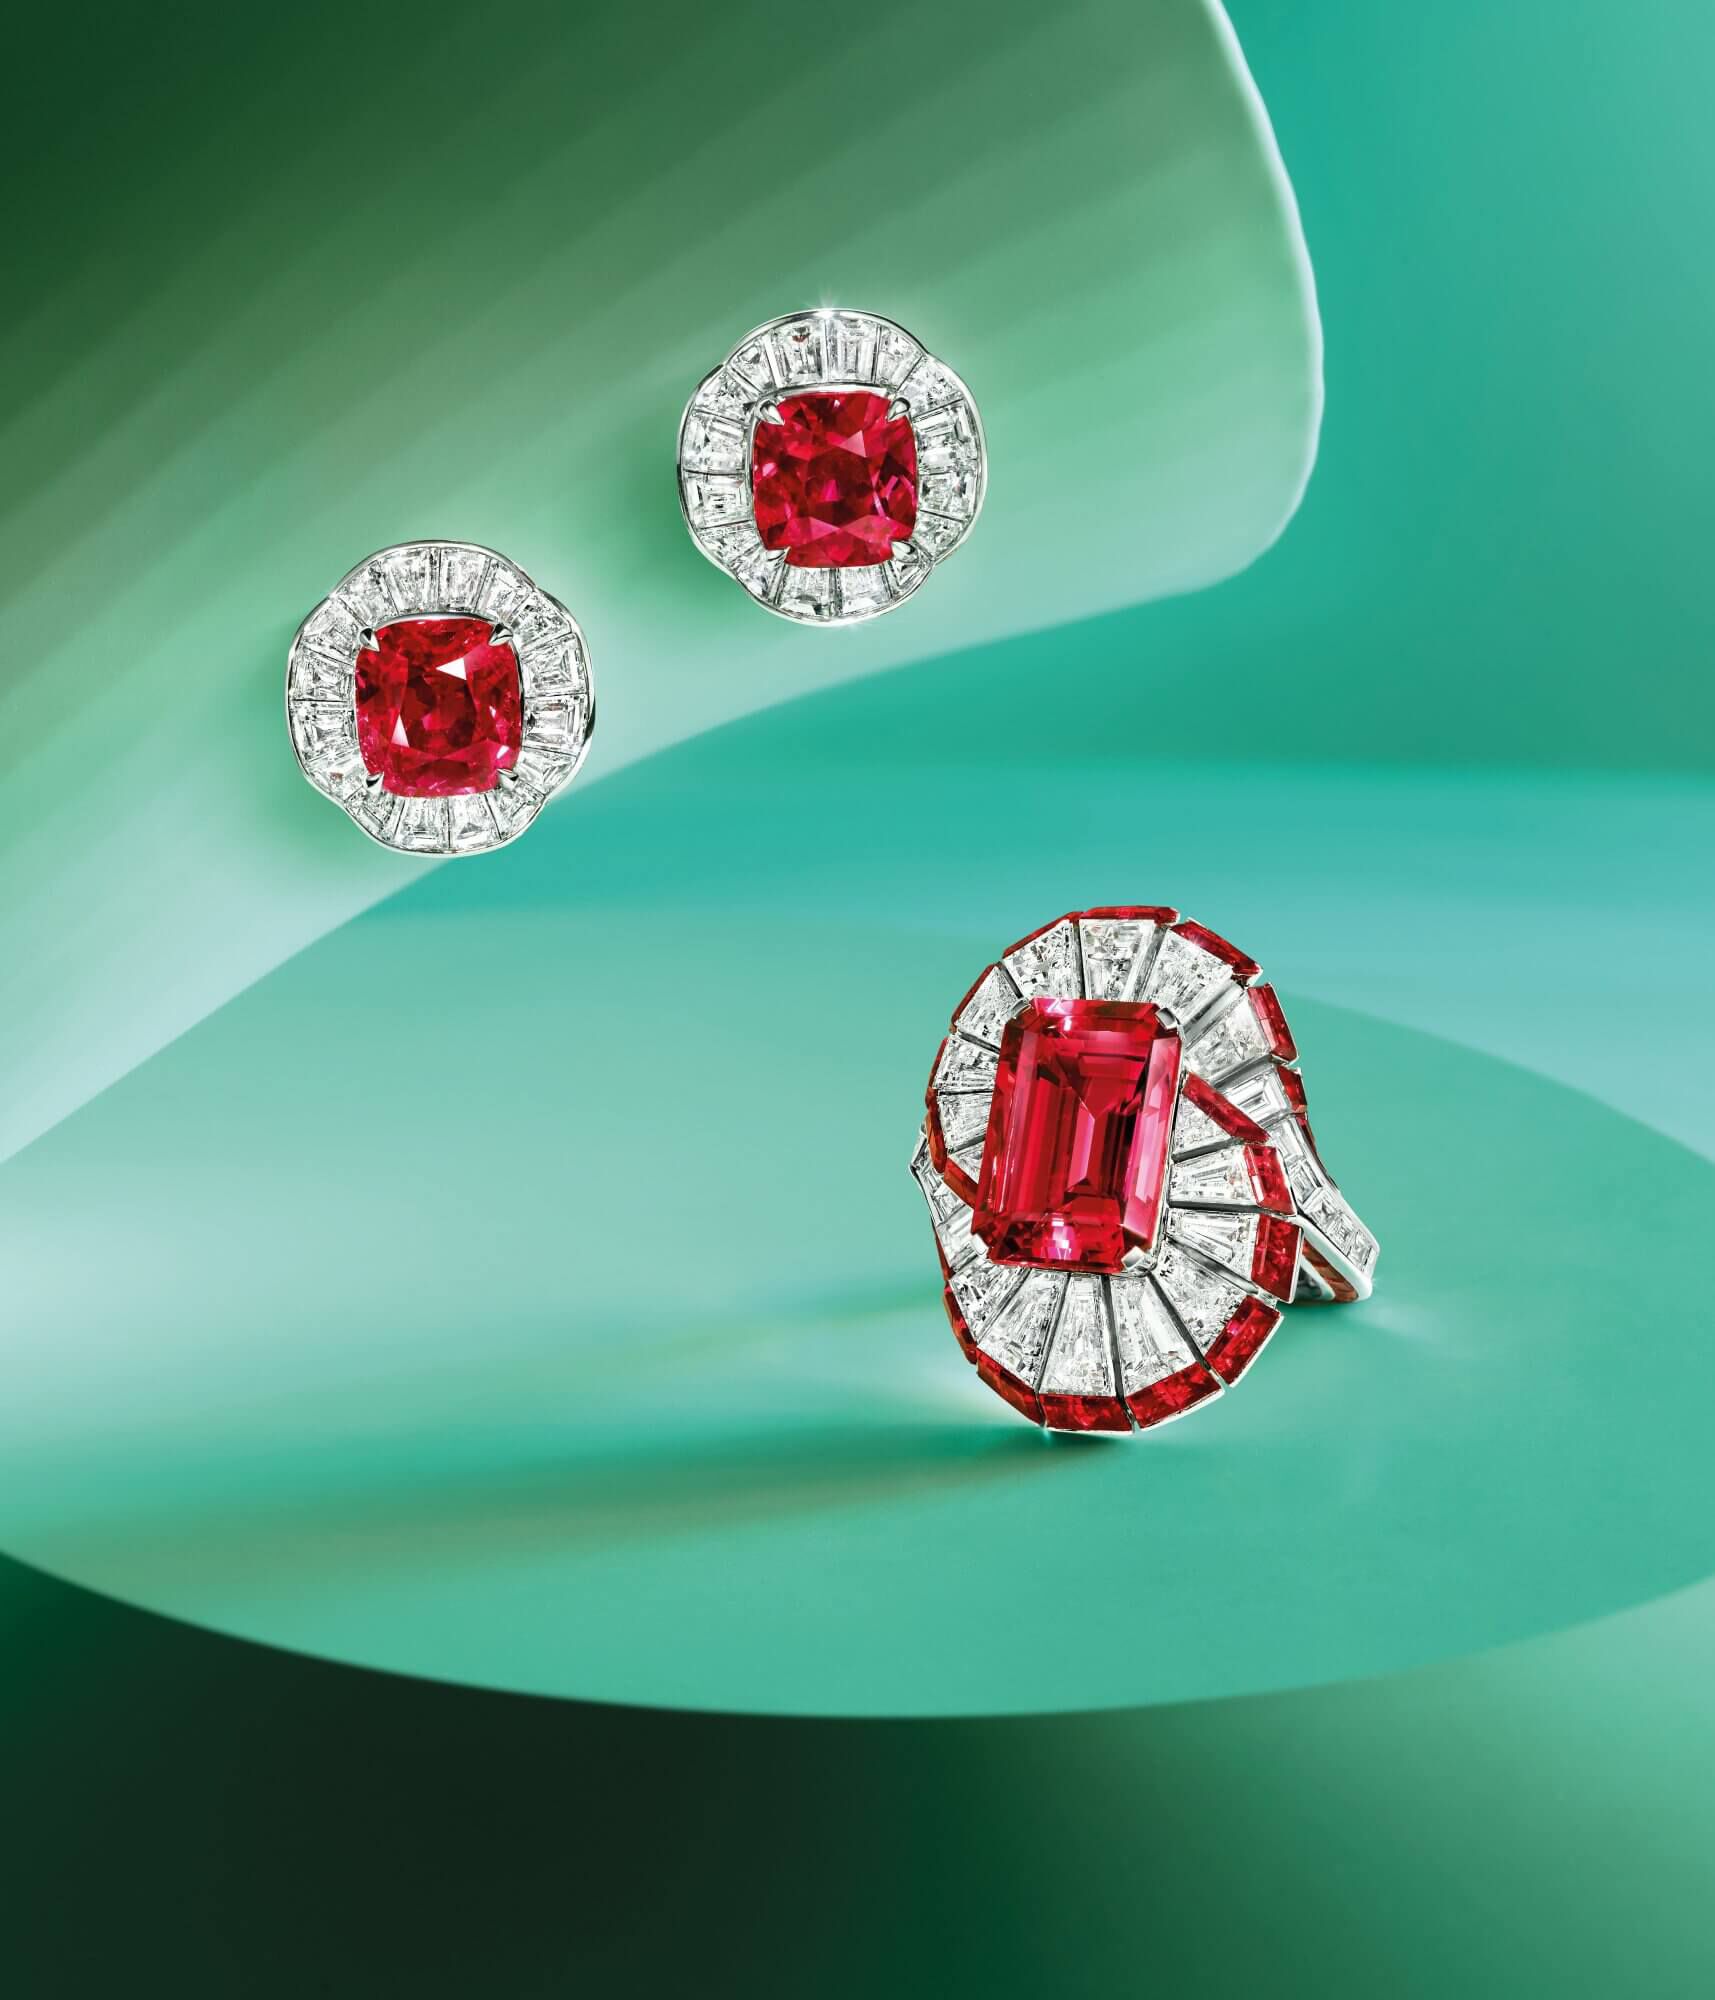 Graff Ruby and Diamond Ring and Earrings on greeny background